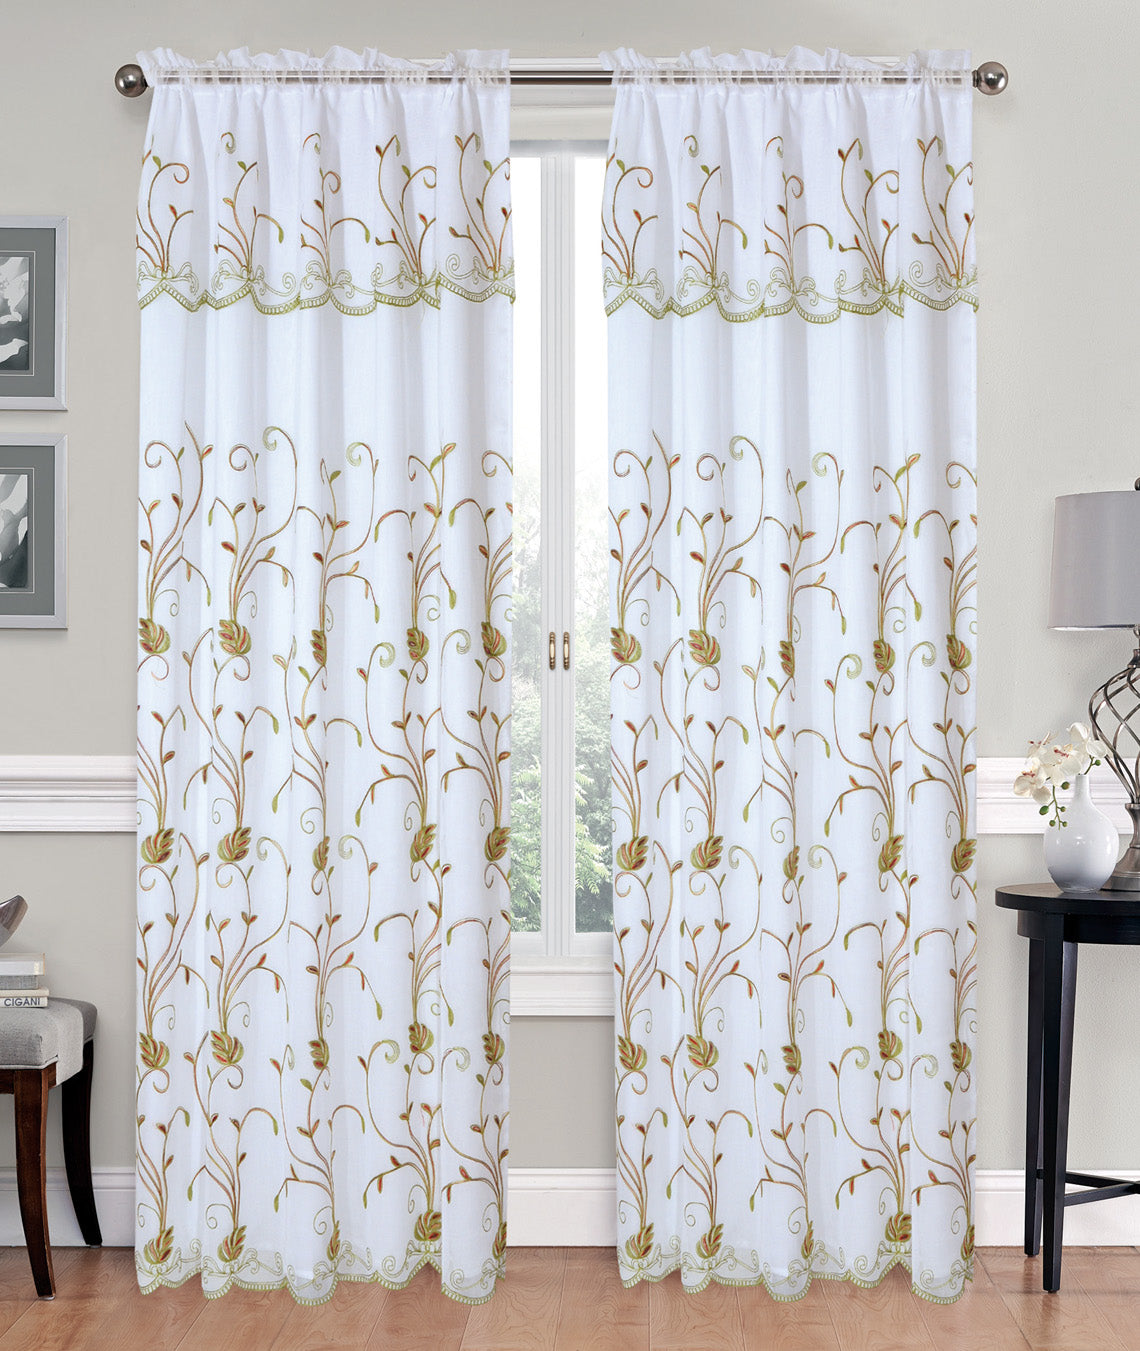 Fiona - Voile Rainbow Embroidered Panel with Valance & Satin backing - Glory Home Design